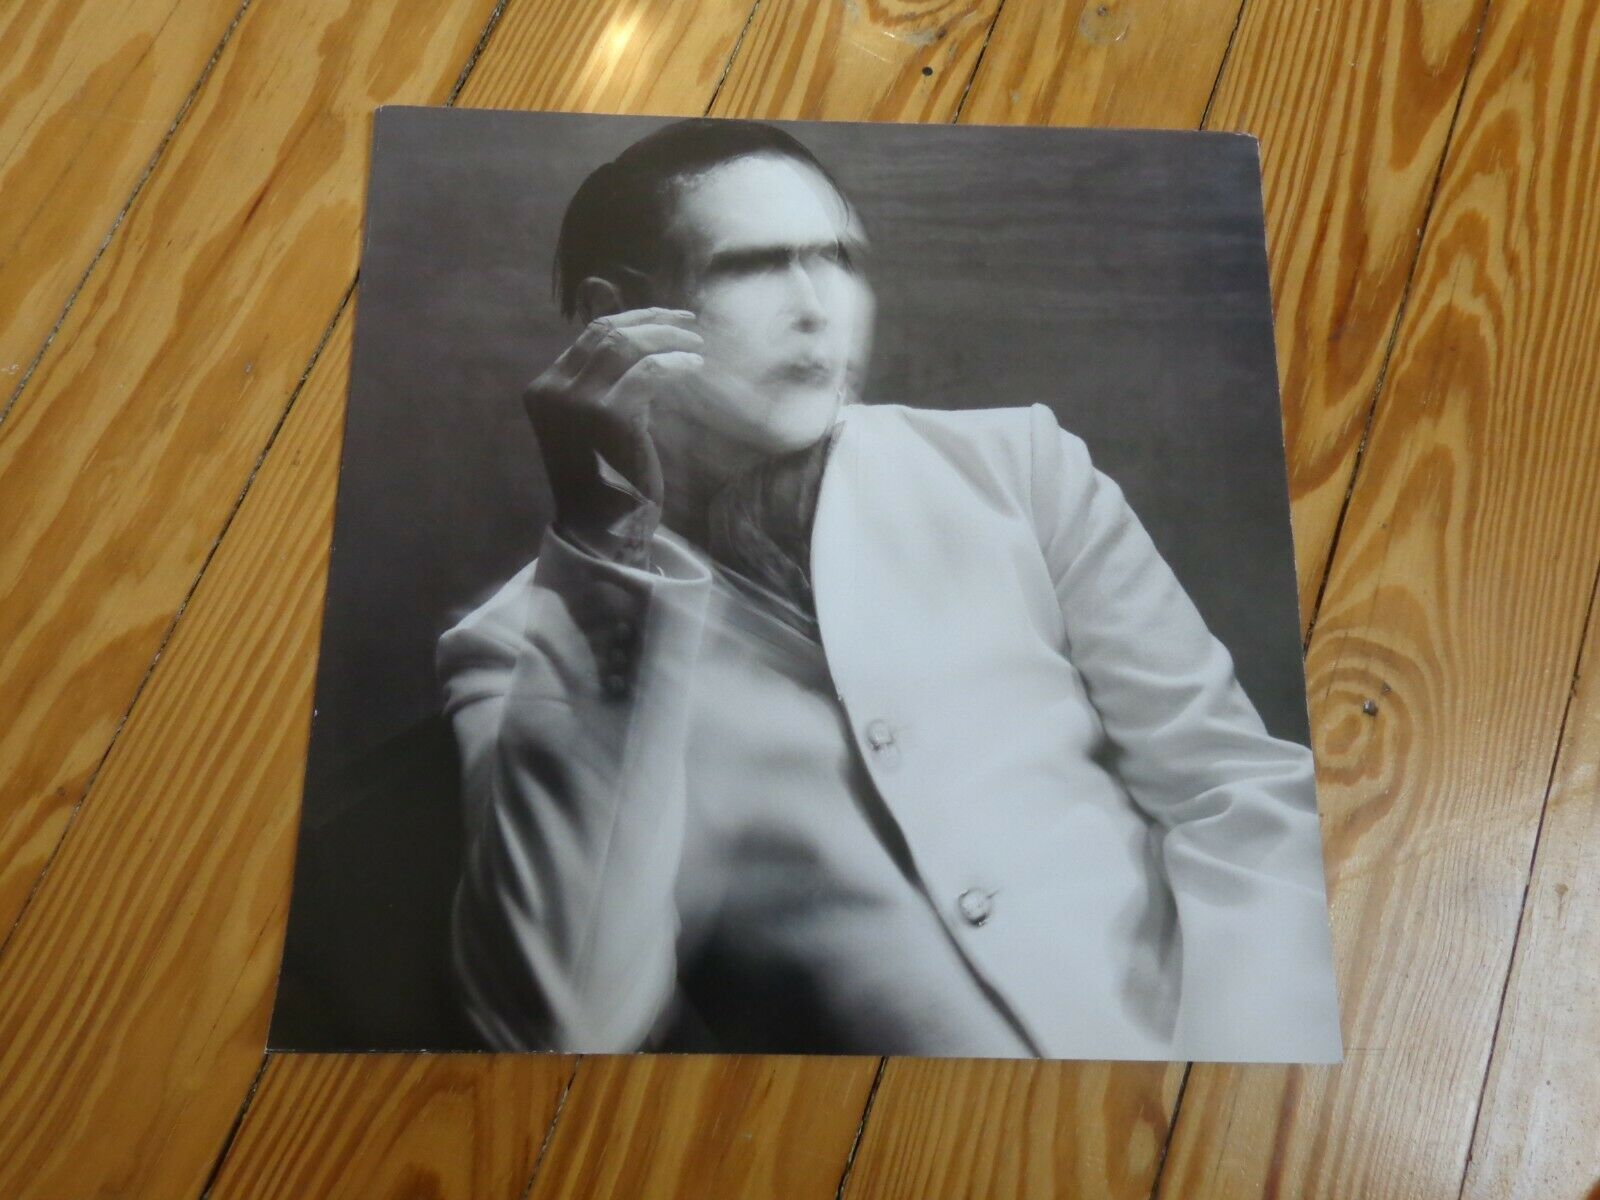 Marilyn Manson Poster 2-sided Flat Square Promo 12x12